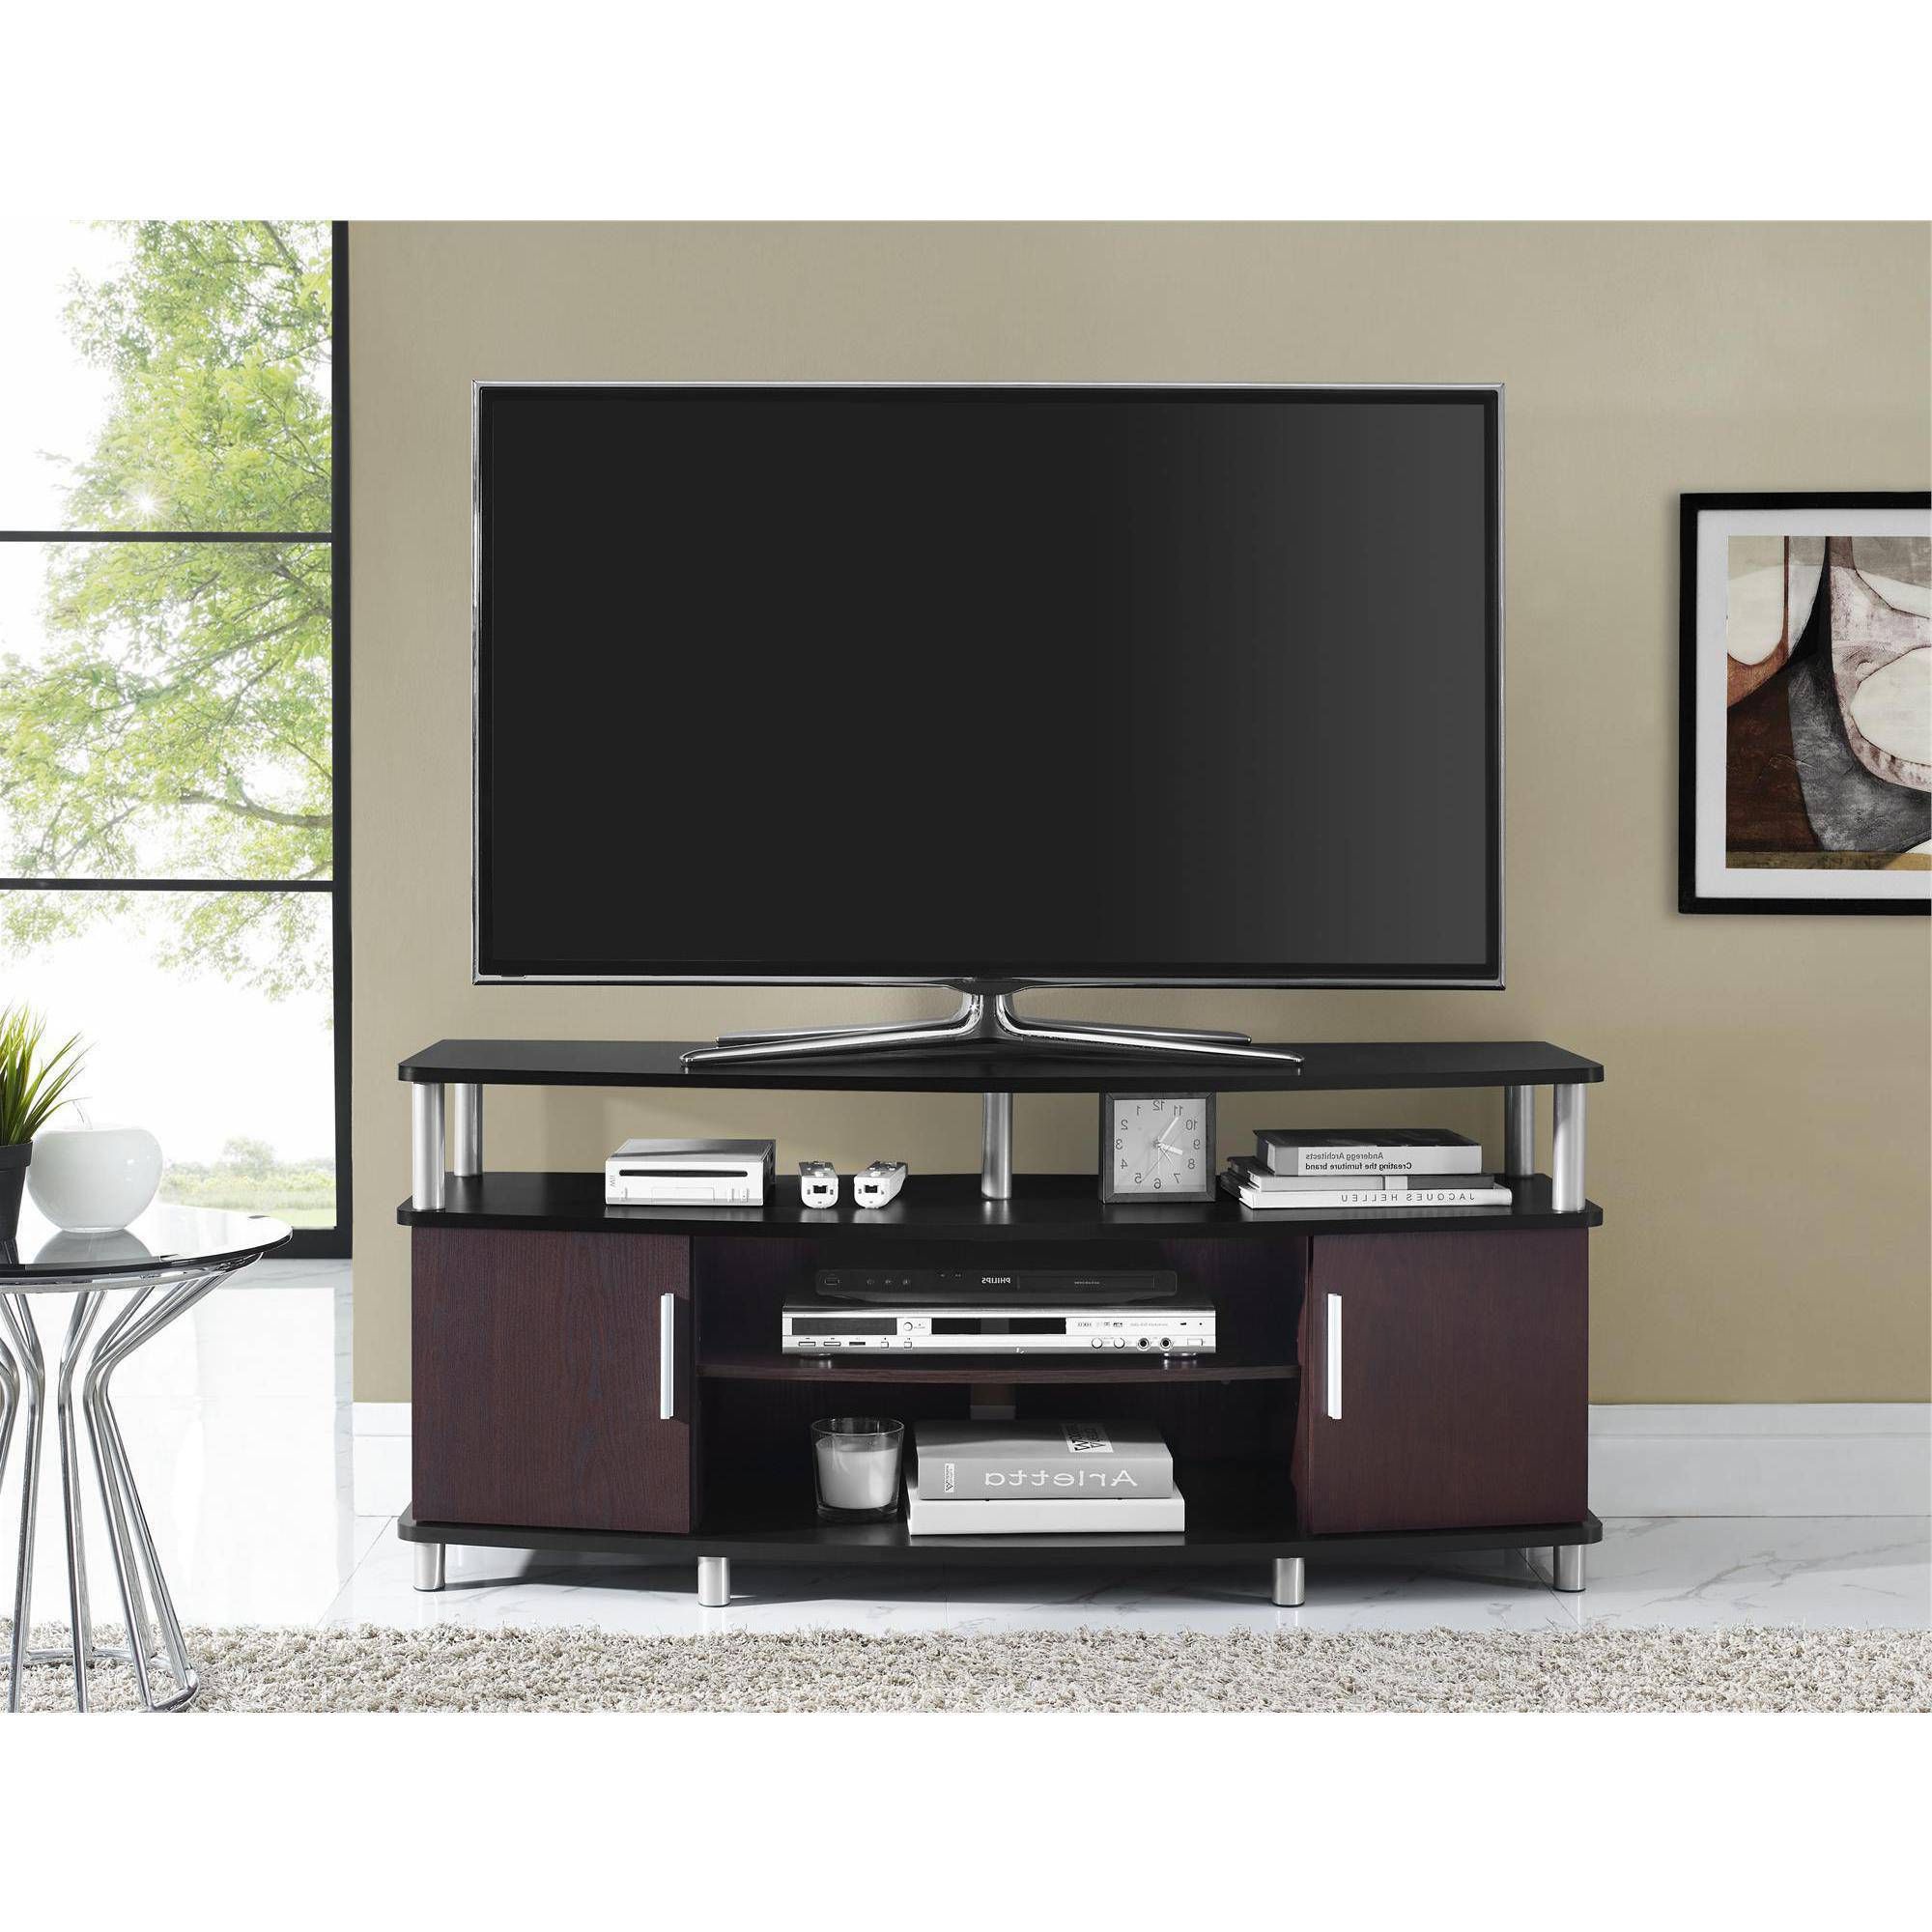 Tv Stands. 65 Inch Corner Tv Stand Flat Screen: Appealing 65 Inch Inside Forma 65 Inch Tv Stands (Gallery 8 of 20)